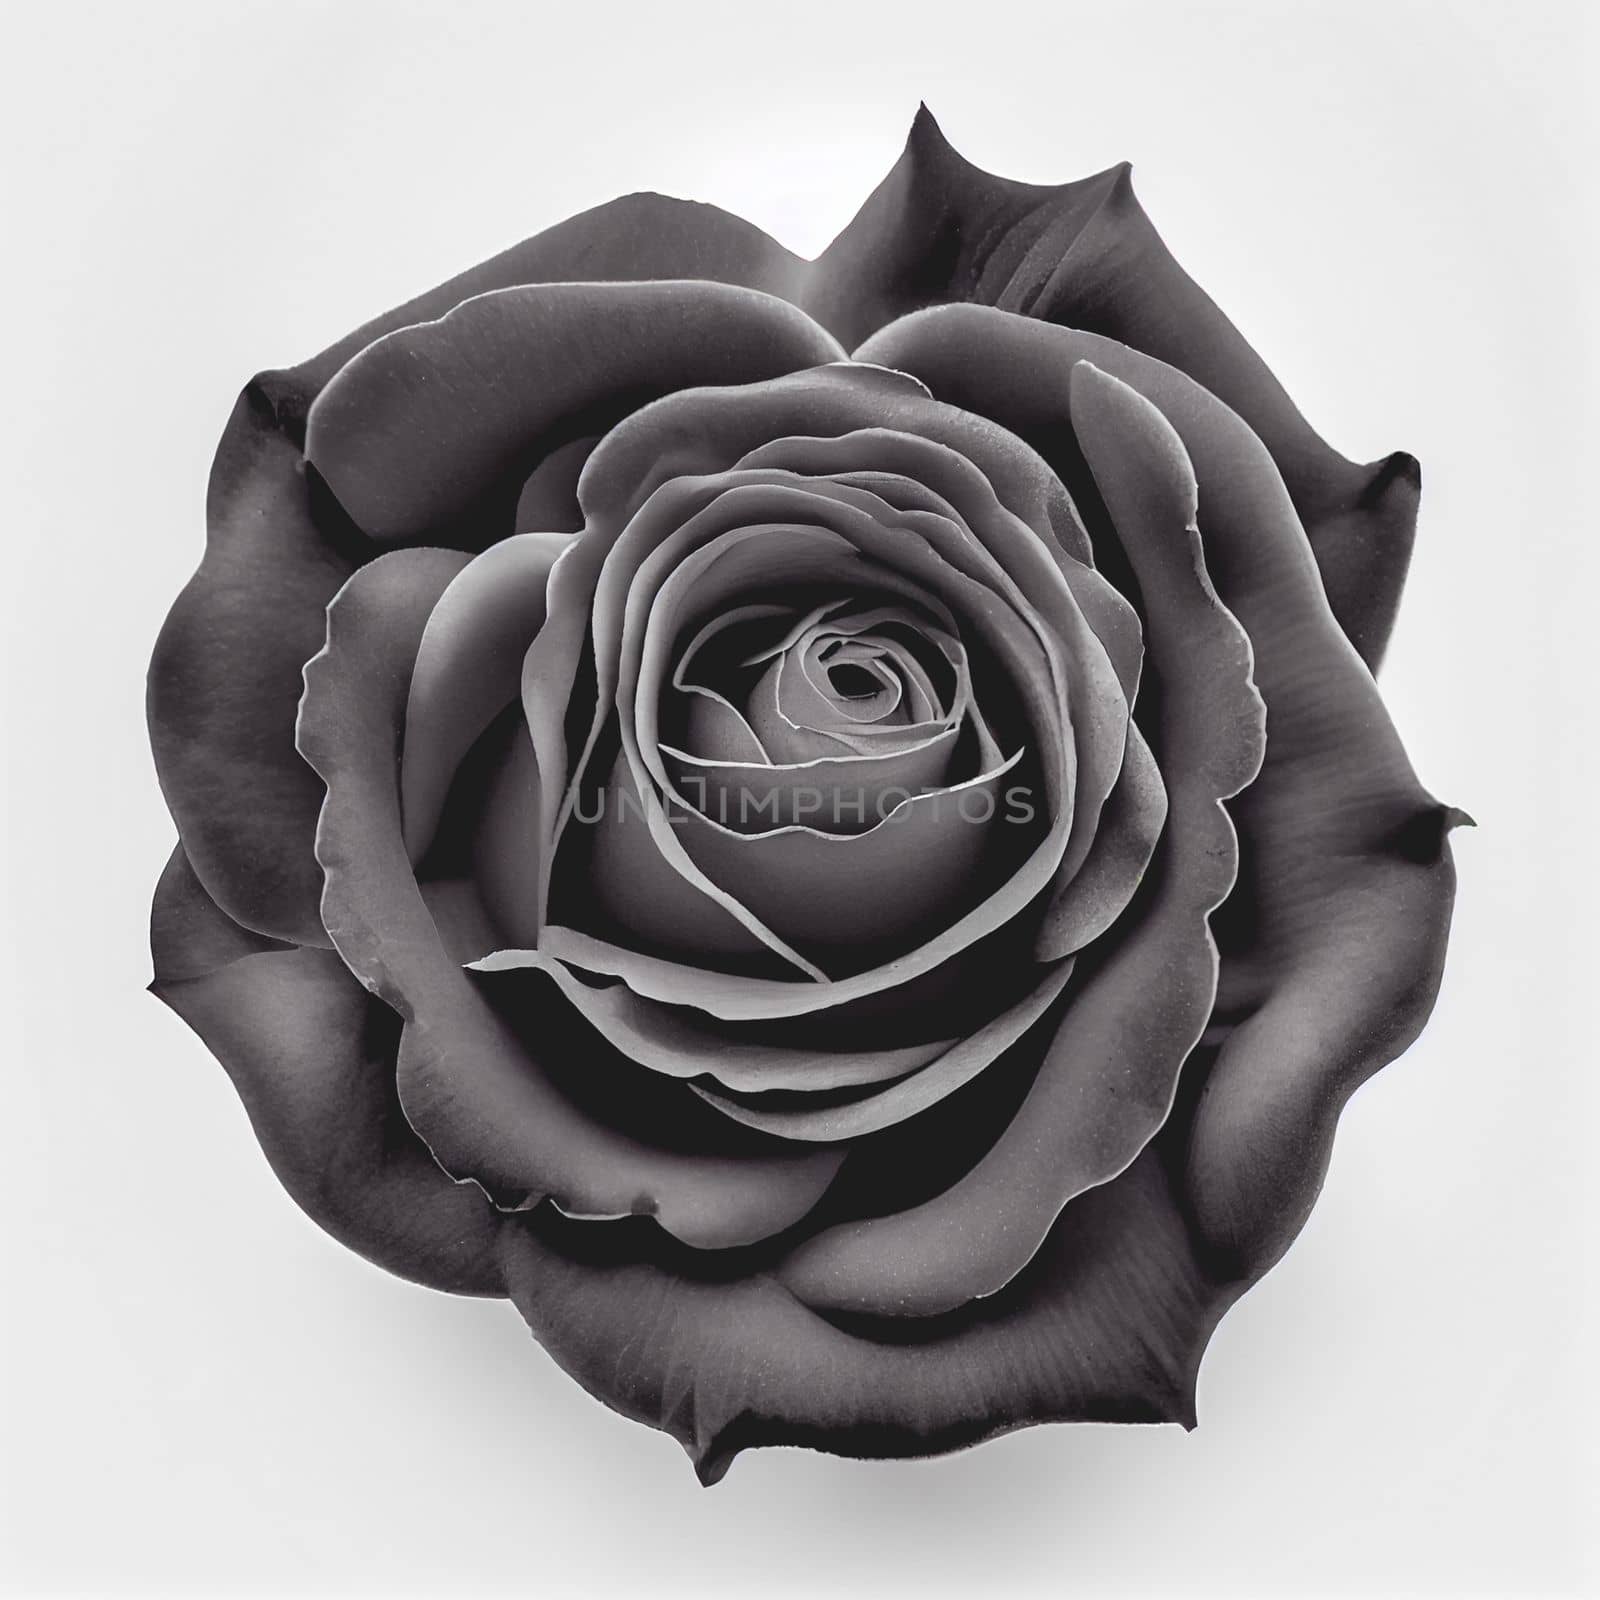 Top view of Black Rose flower on a white background, perfect for representing the theme of Valentine's Day.